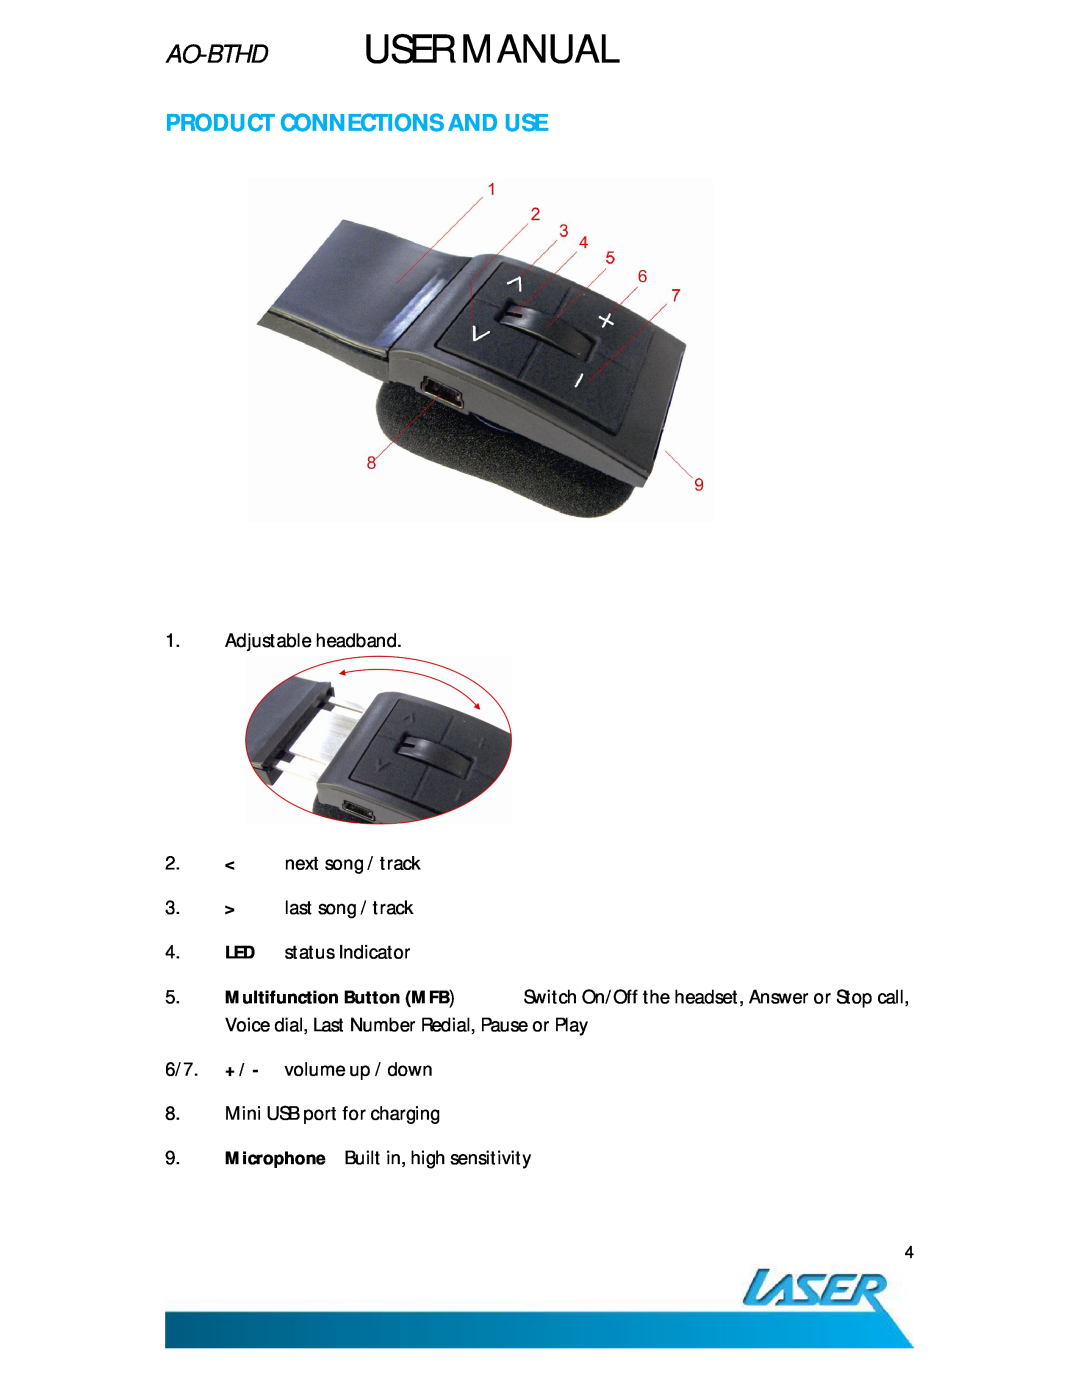 Laser AO-BTHD user manual Product Connections And Use, Multifunction Button MFB 